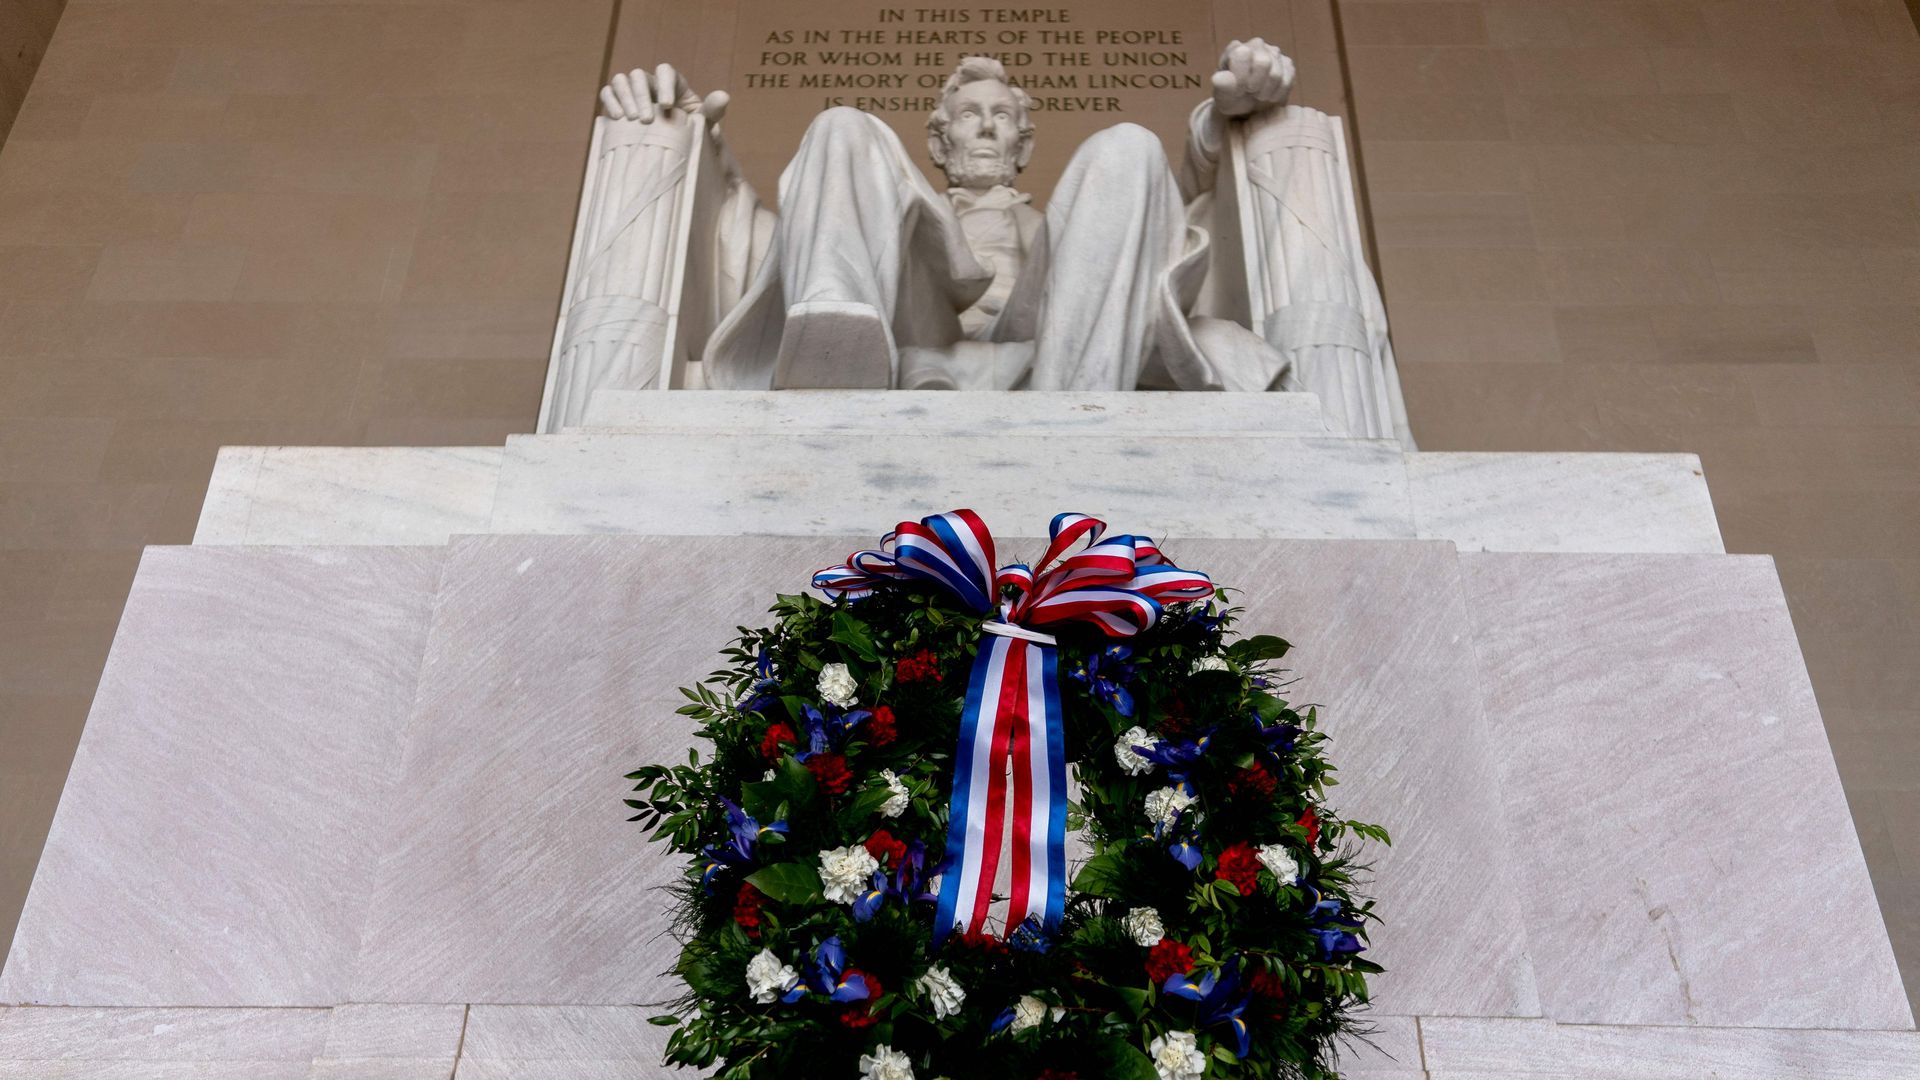 A wreath is seen at the foot of the statue of Abraham Lincoln on what would have been his 213th birthday.